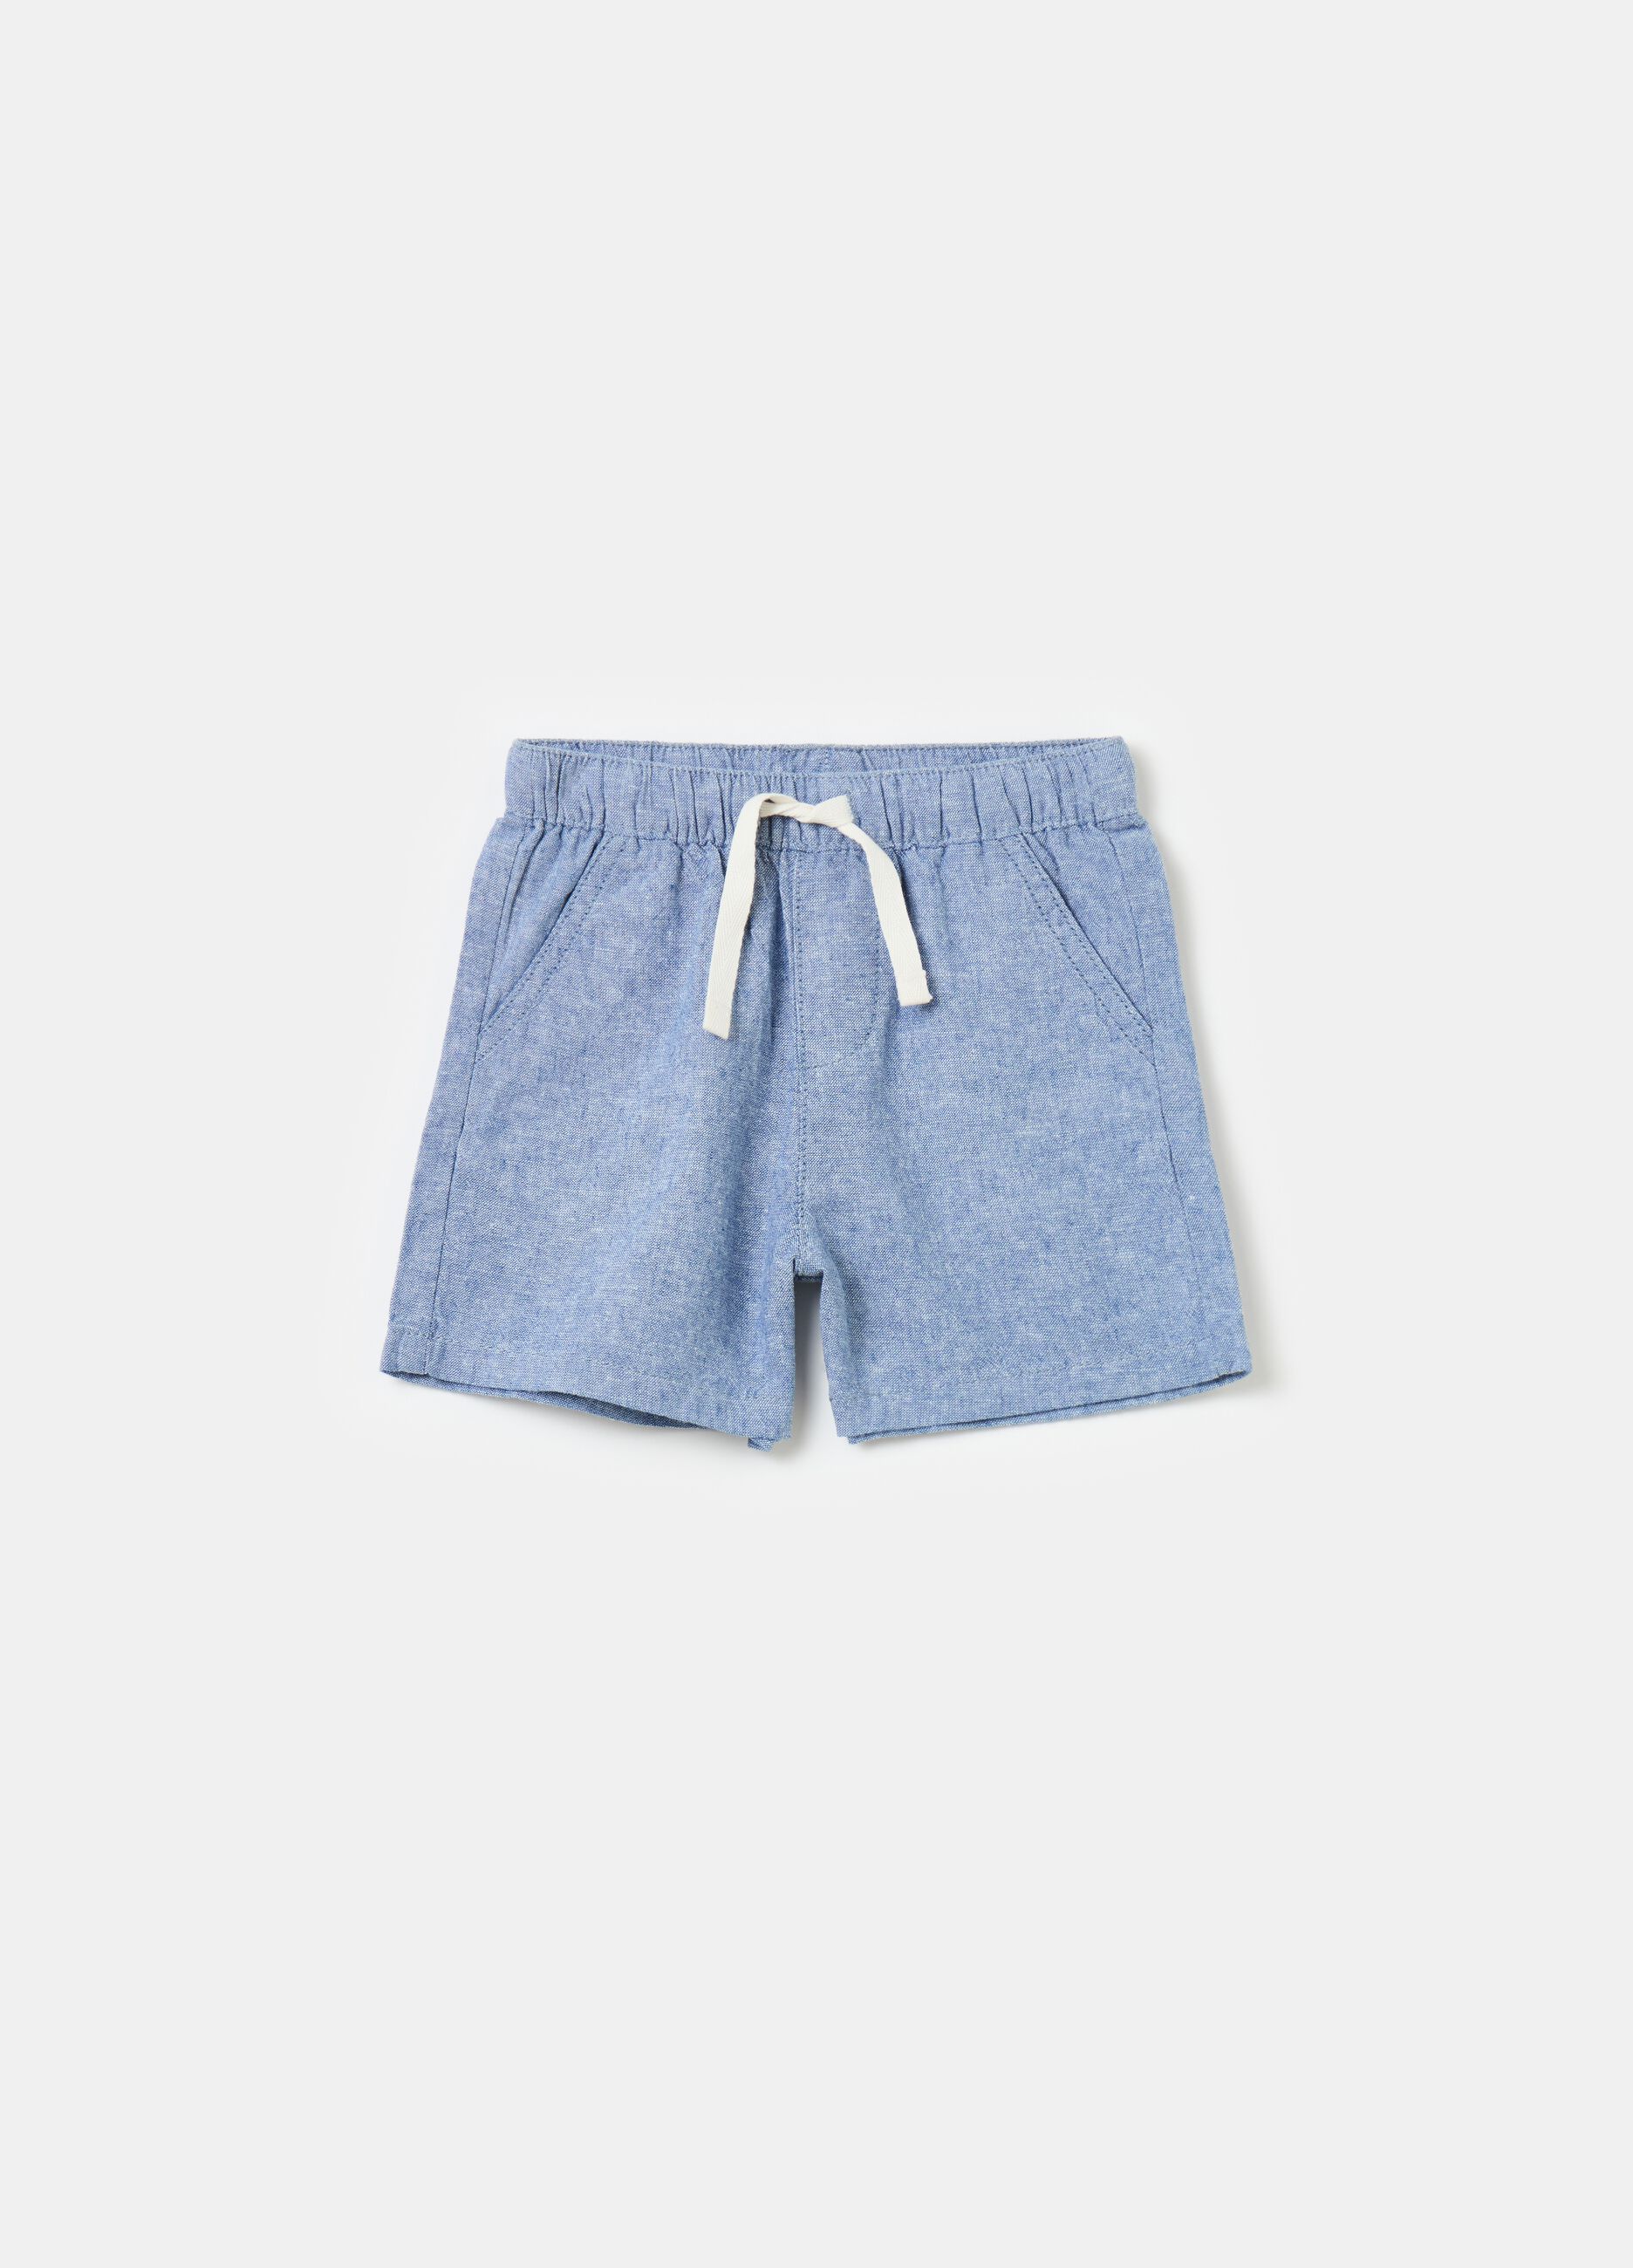 Bermuda shorts in linen and cotton with drawstring